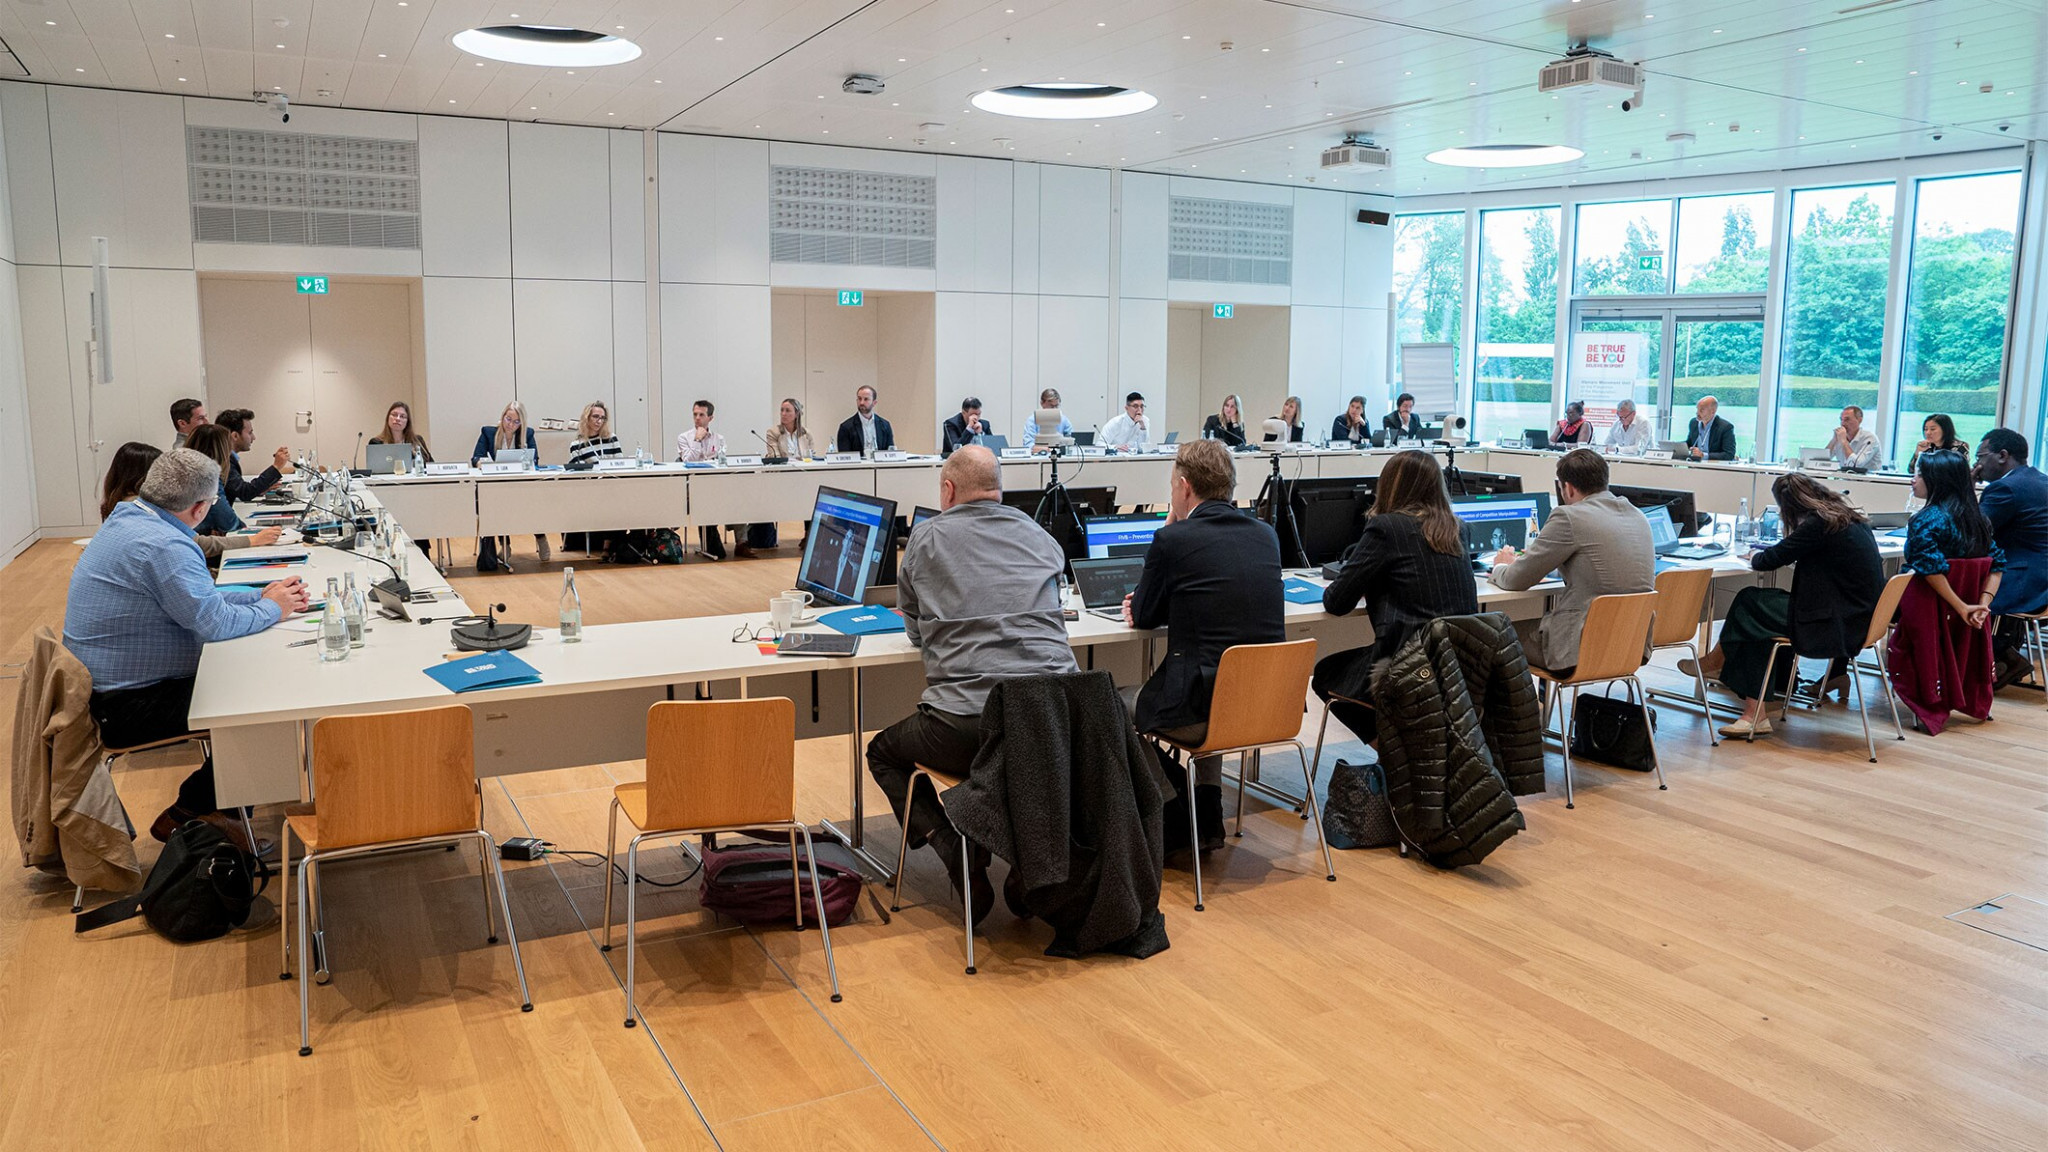 International Federations in Lausanne for IOC seminar on prevention of sports manipulation